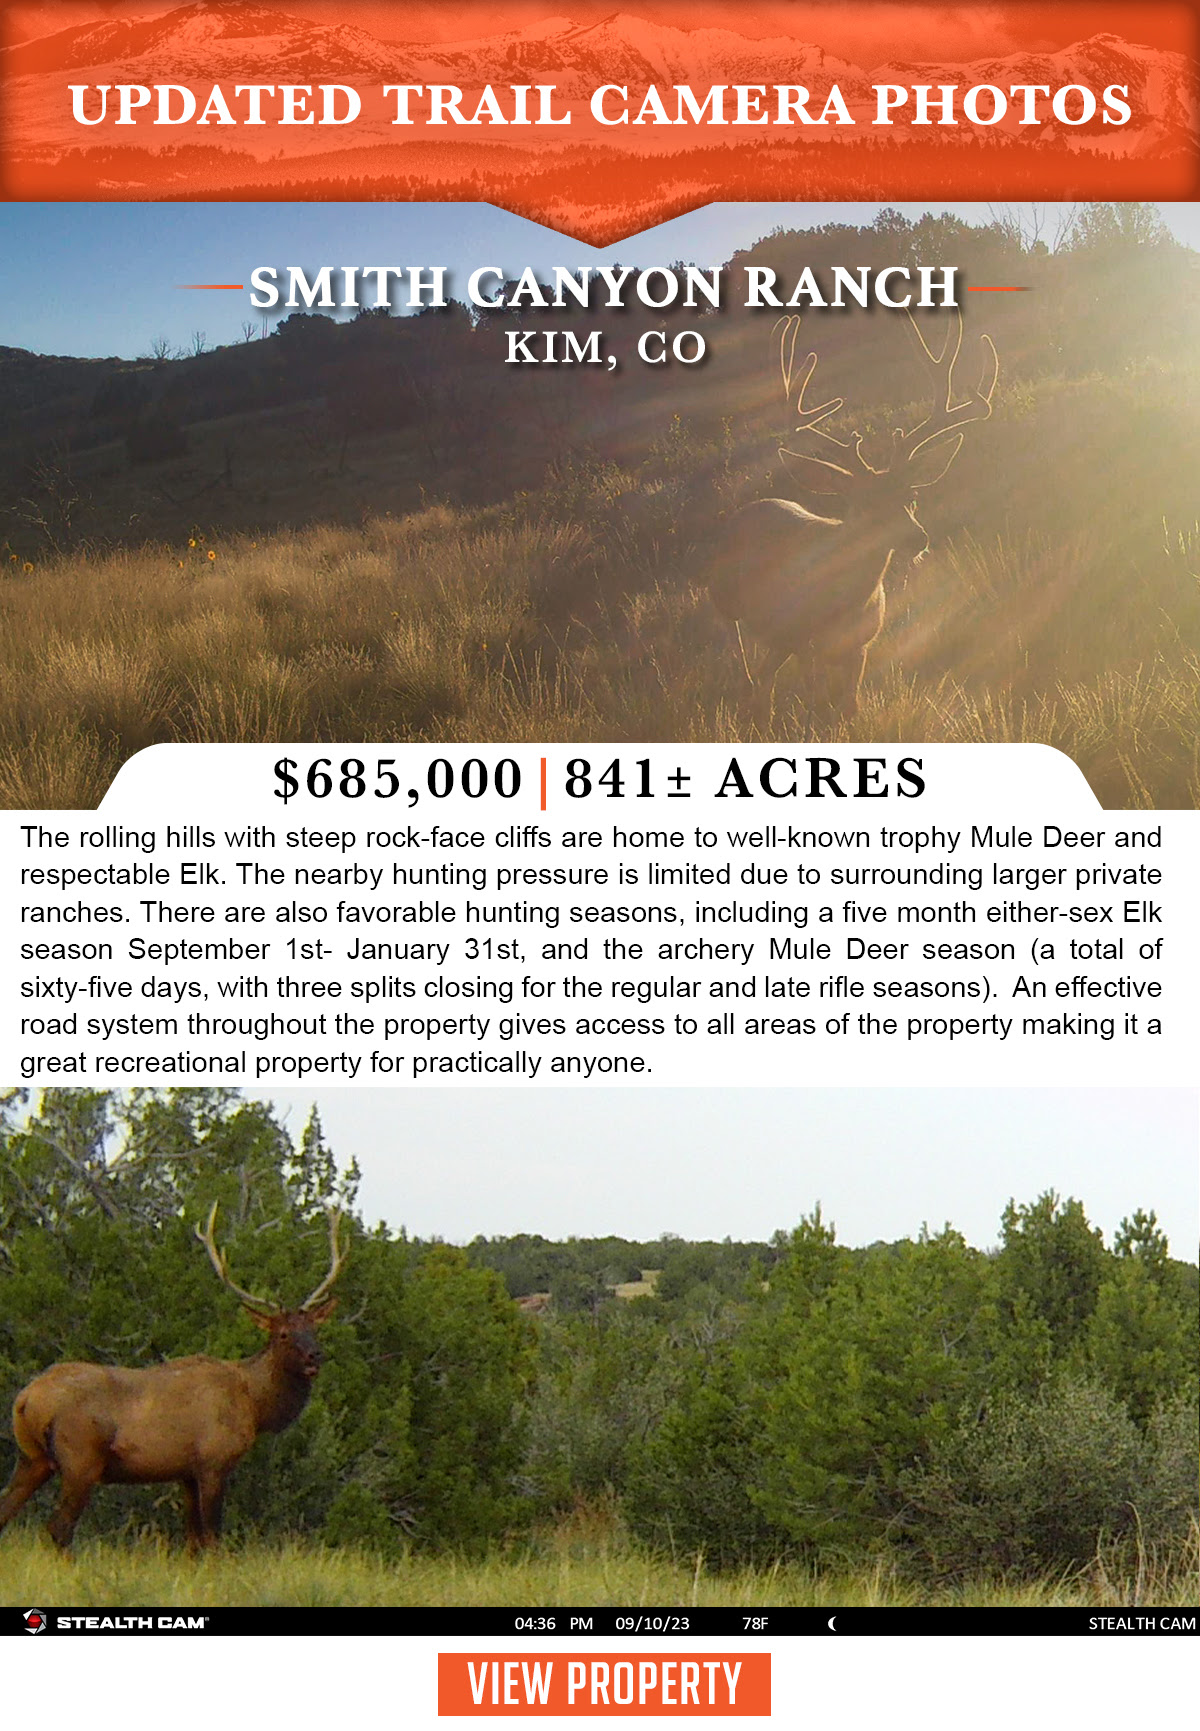 Updated Trail Camera Photos- Smith Canyon Ranch!